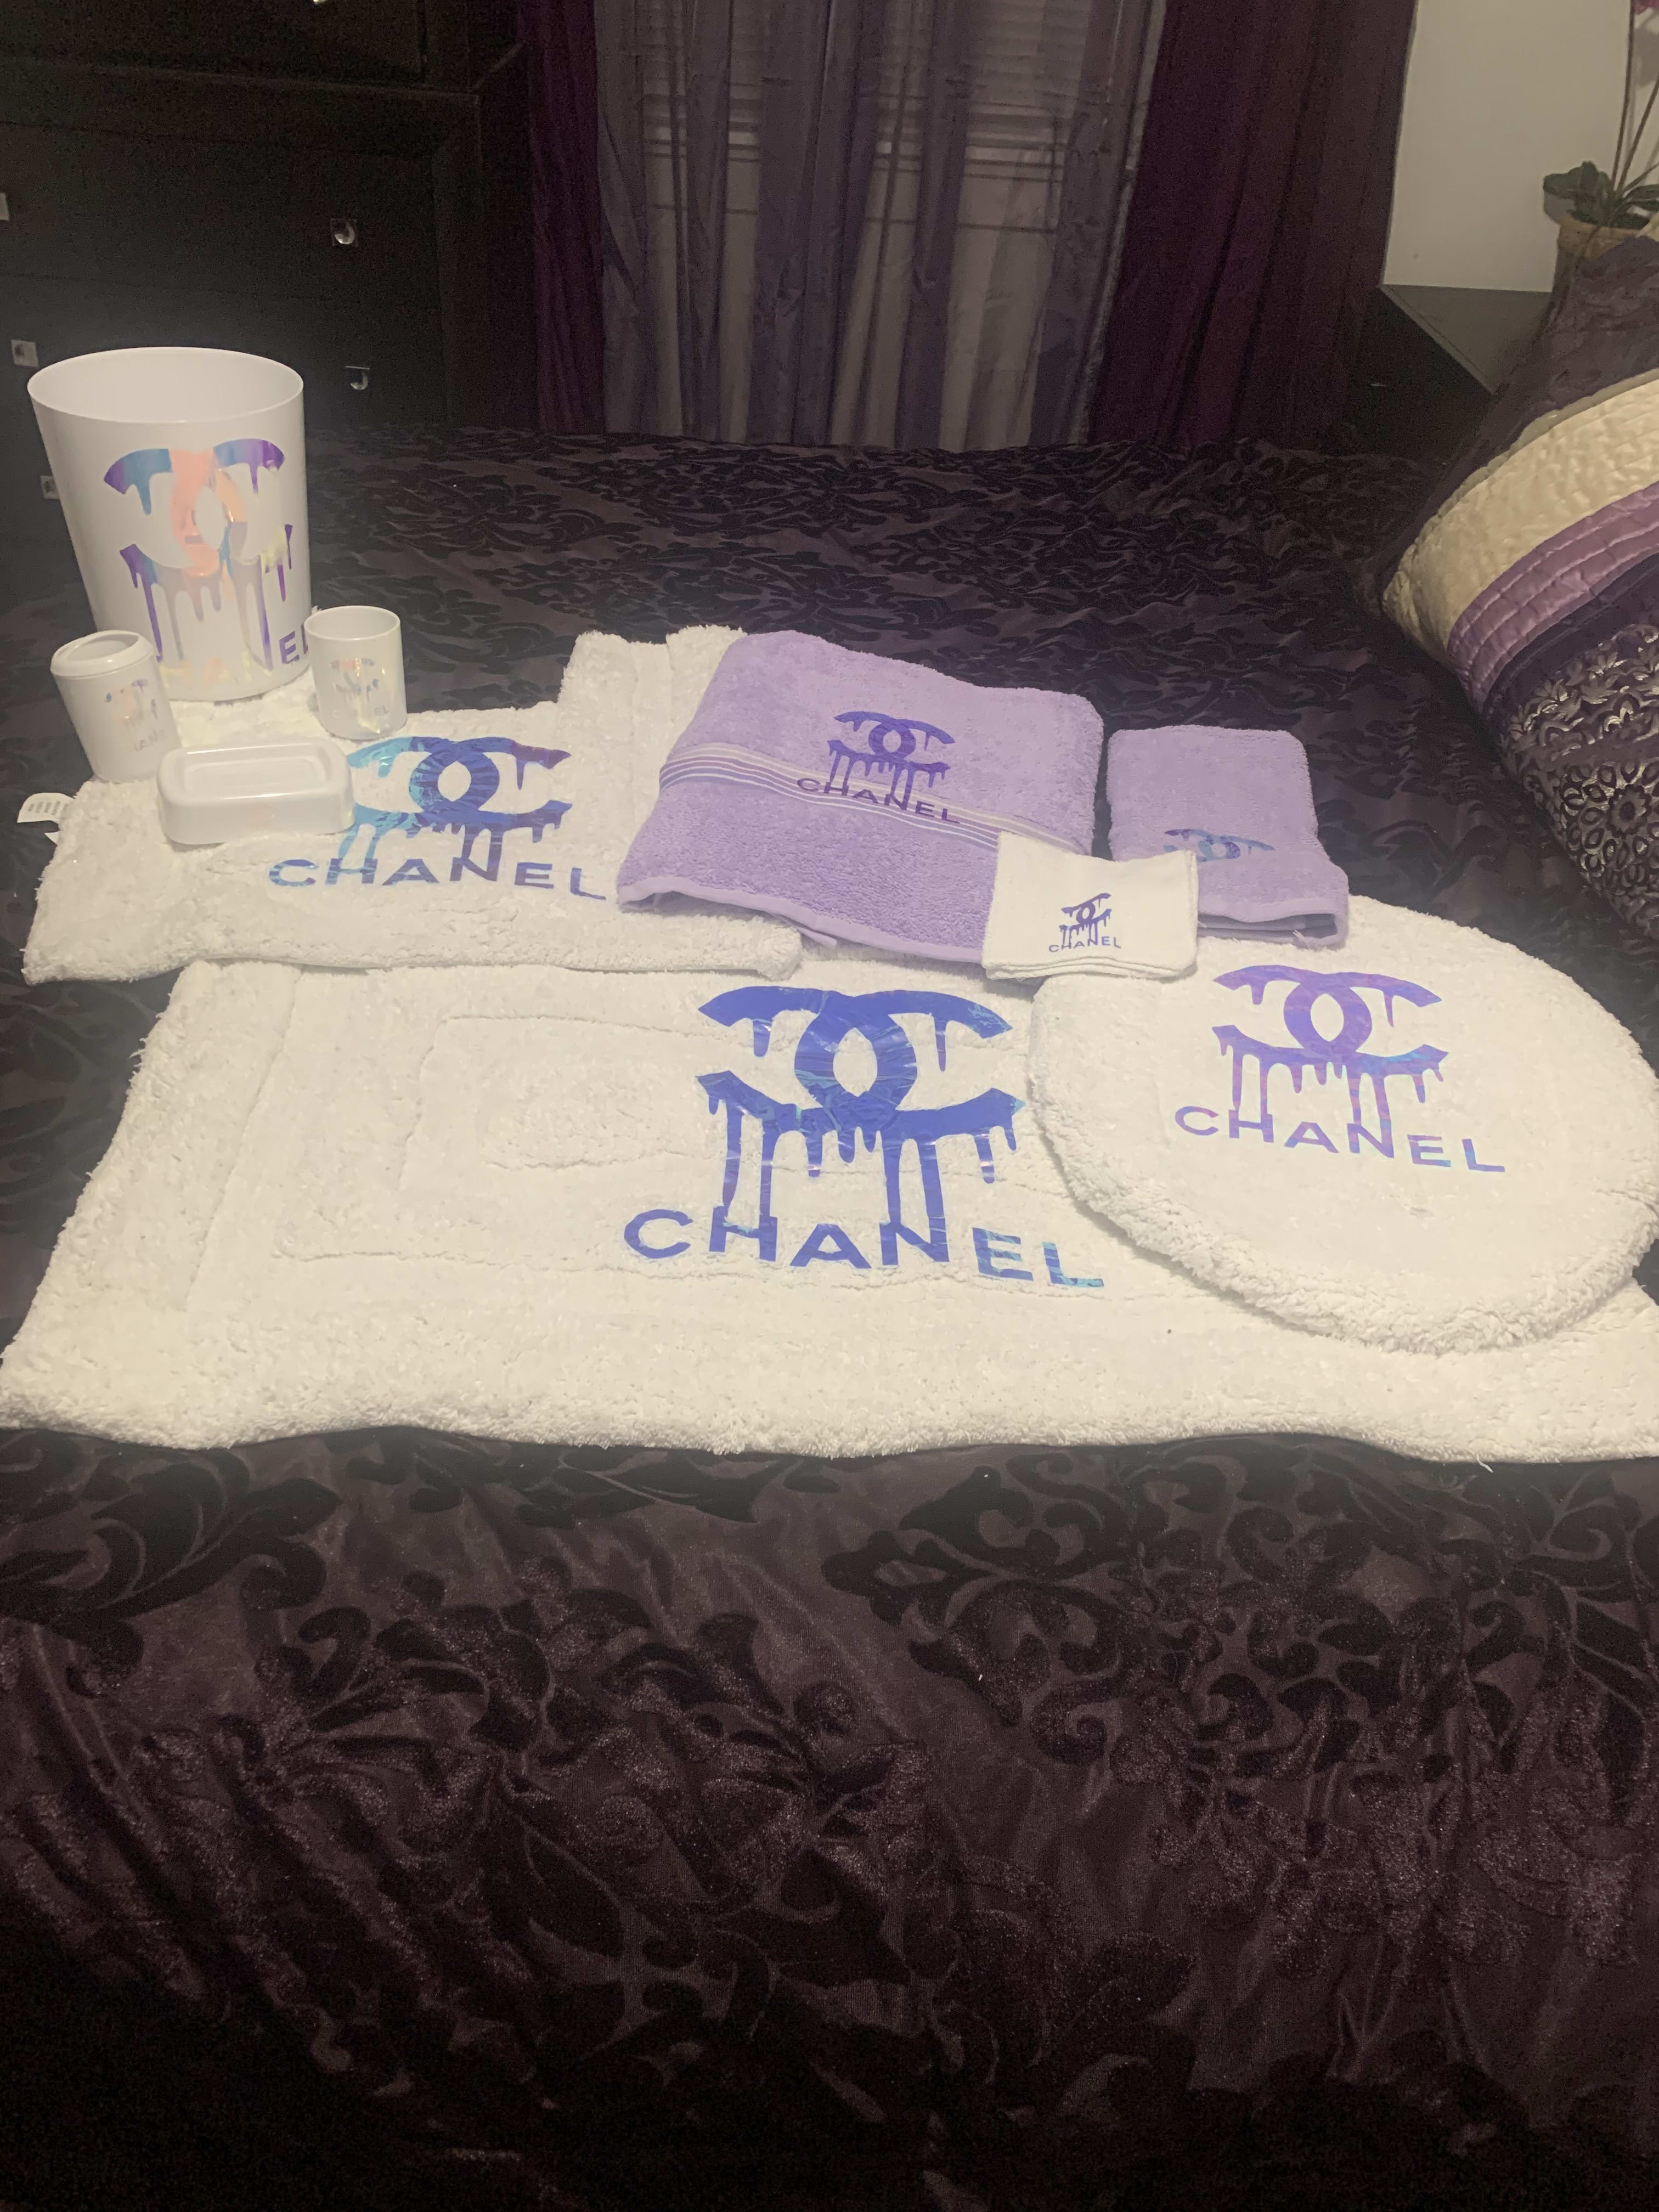 Deluxe Bathroom Set - Customized Items - Designs By D'Marie